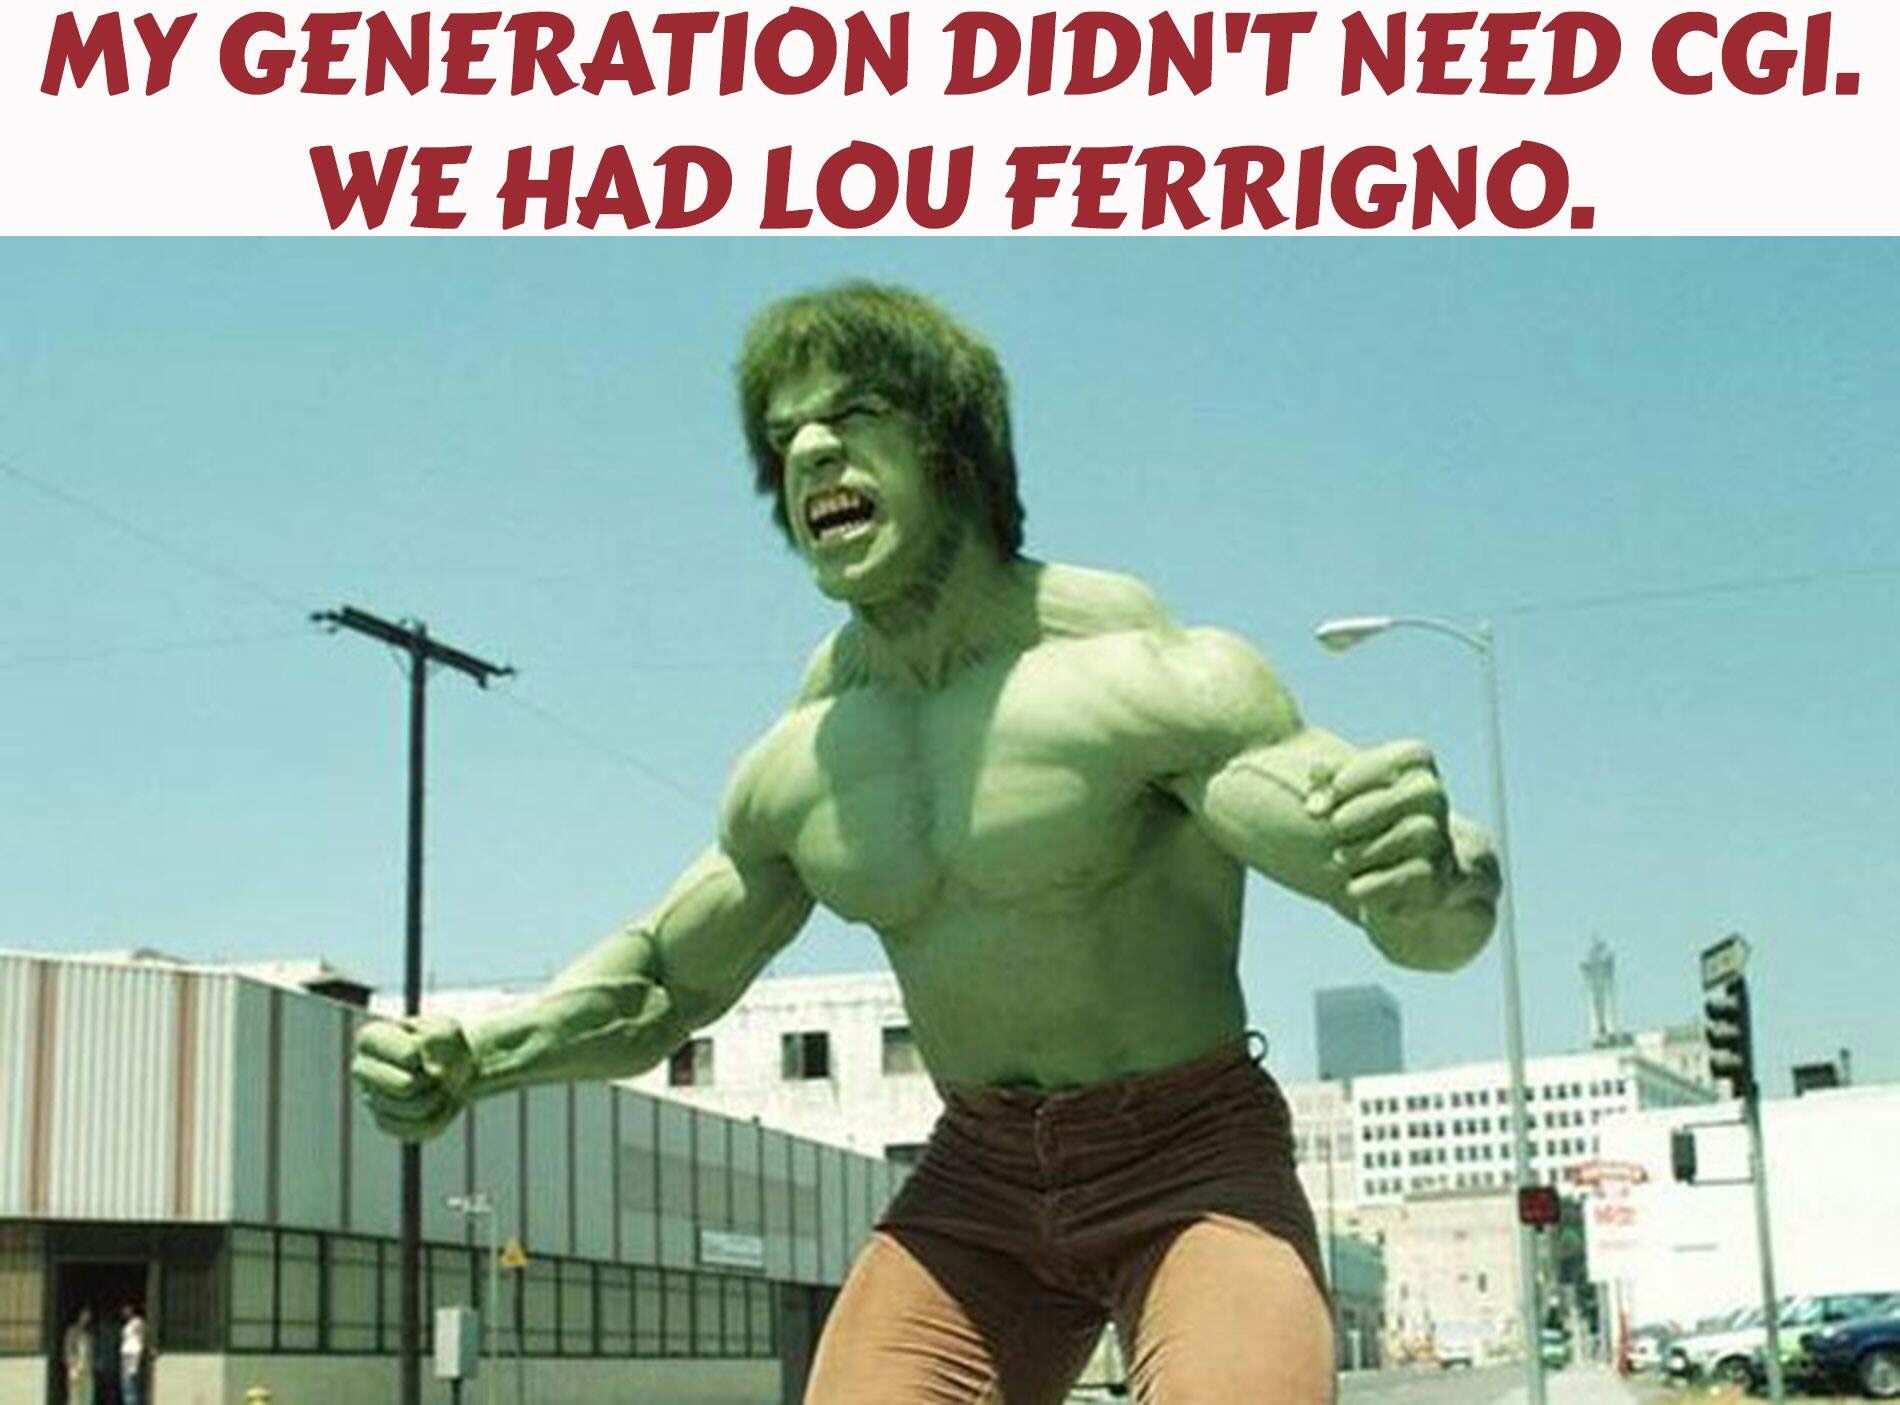 Dank meme about how Lou Ferrigno didn't need any CGI to play the HULK